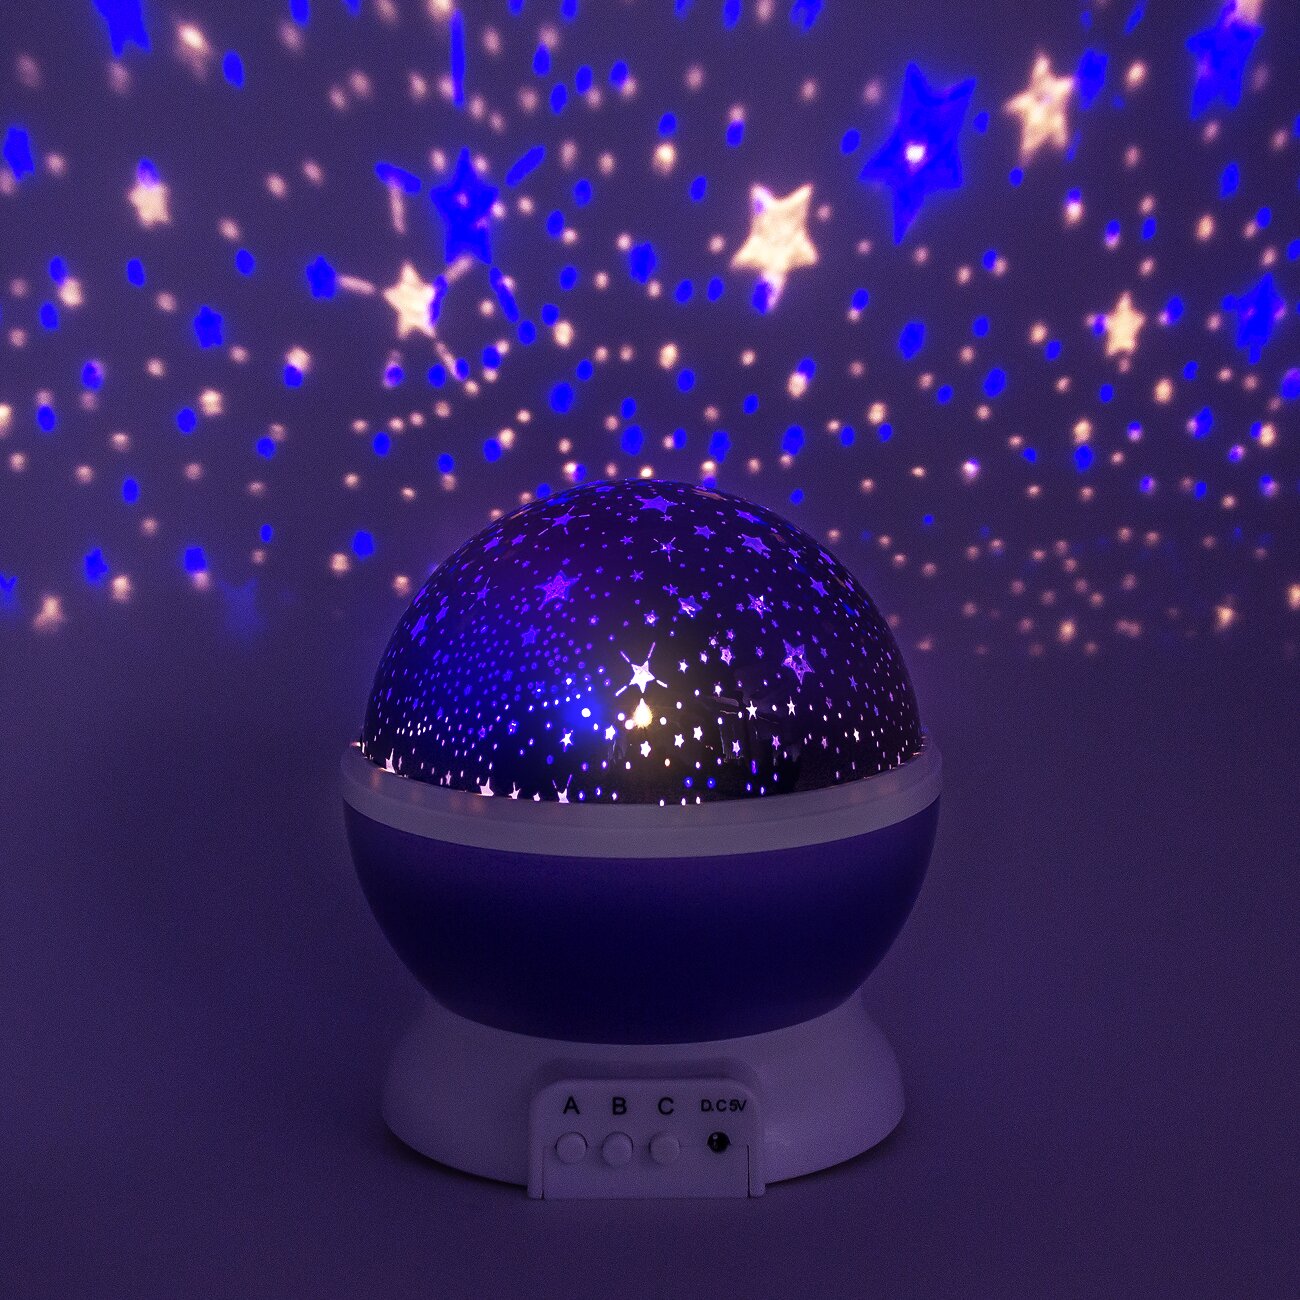 Moon And Stars Night Light Projector - 4.7 * 4.7 * 5.3 inches product